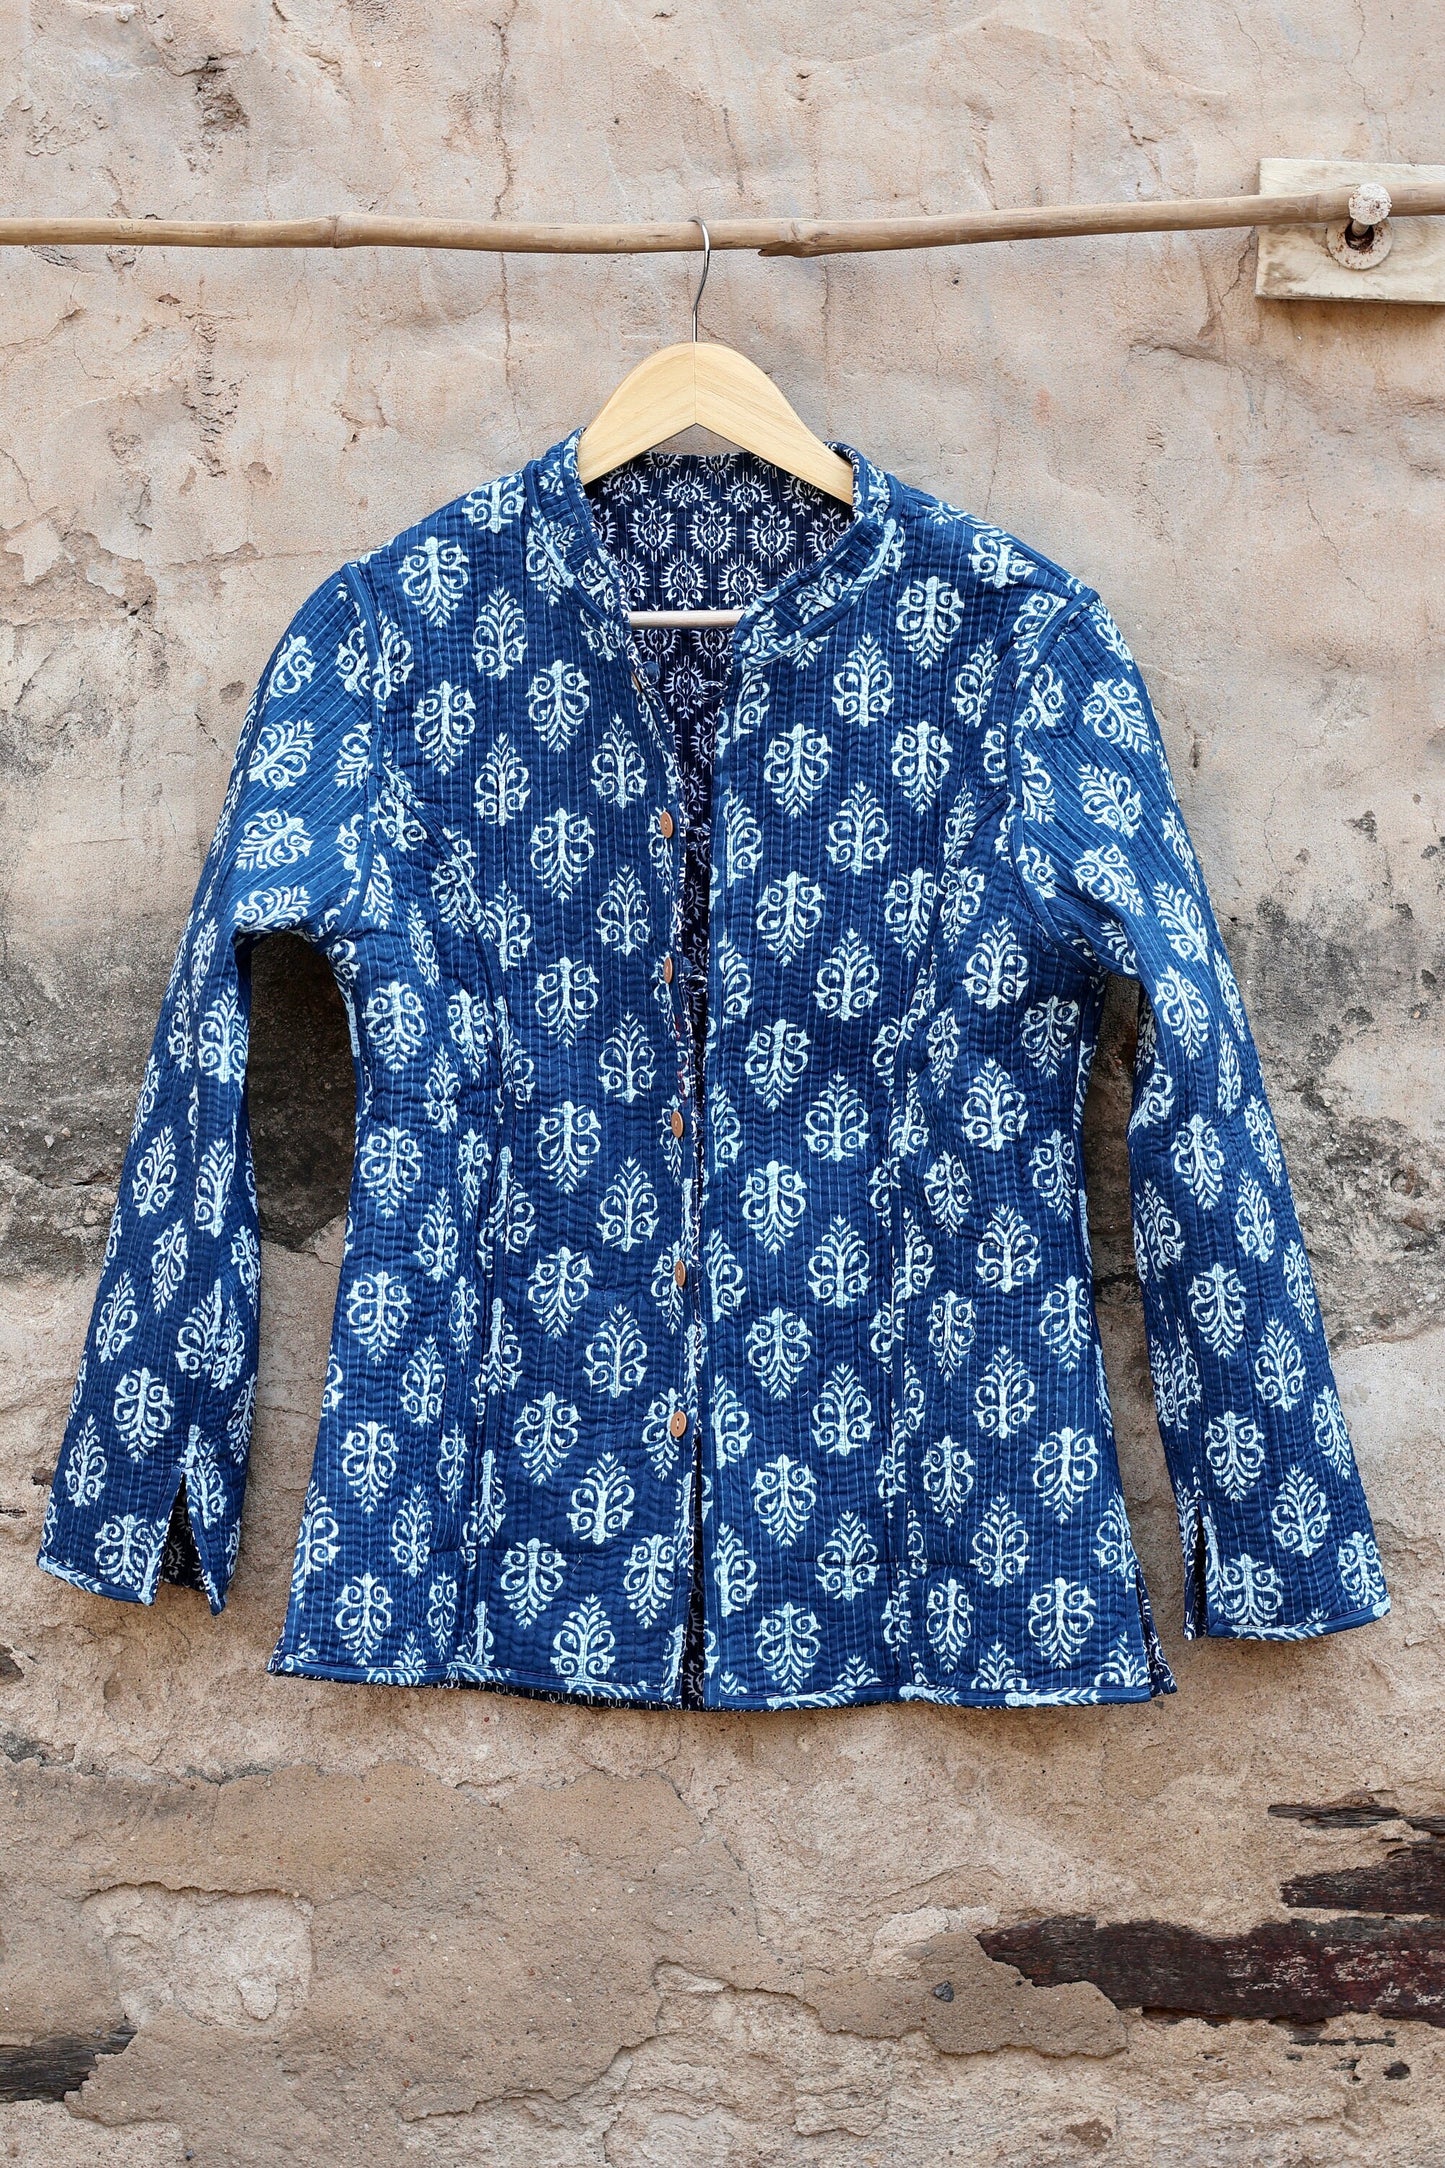 Indian Handmade Quilted Cotton Fabric Kantha Jacket Stylish Blue & White Floral Bohemian Women's Coat, Reversible Waistcoat for Her